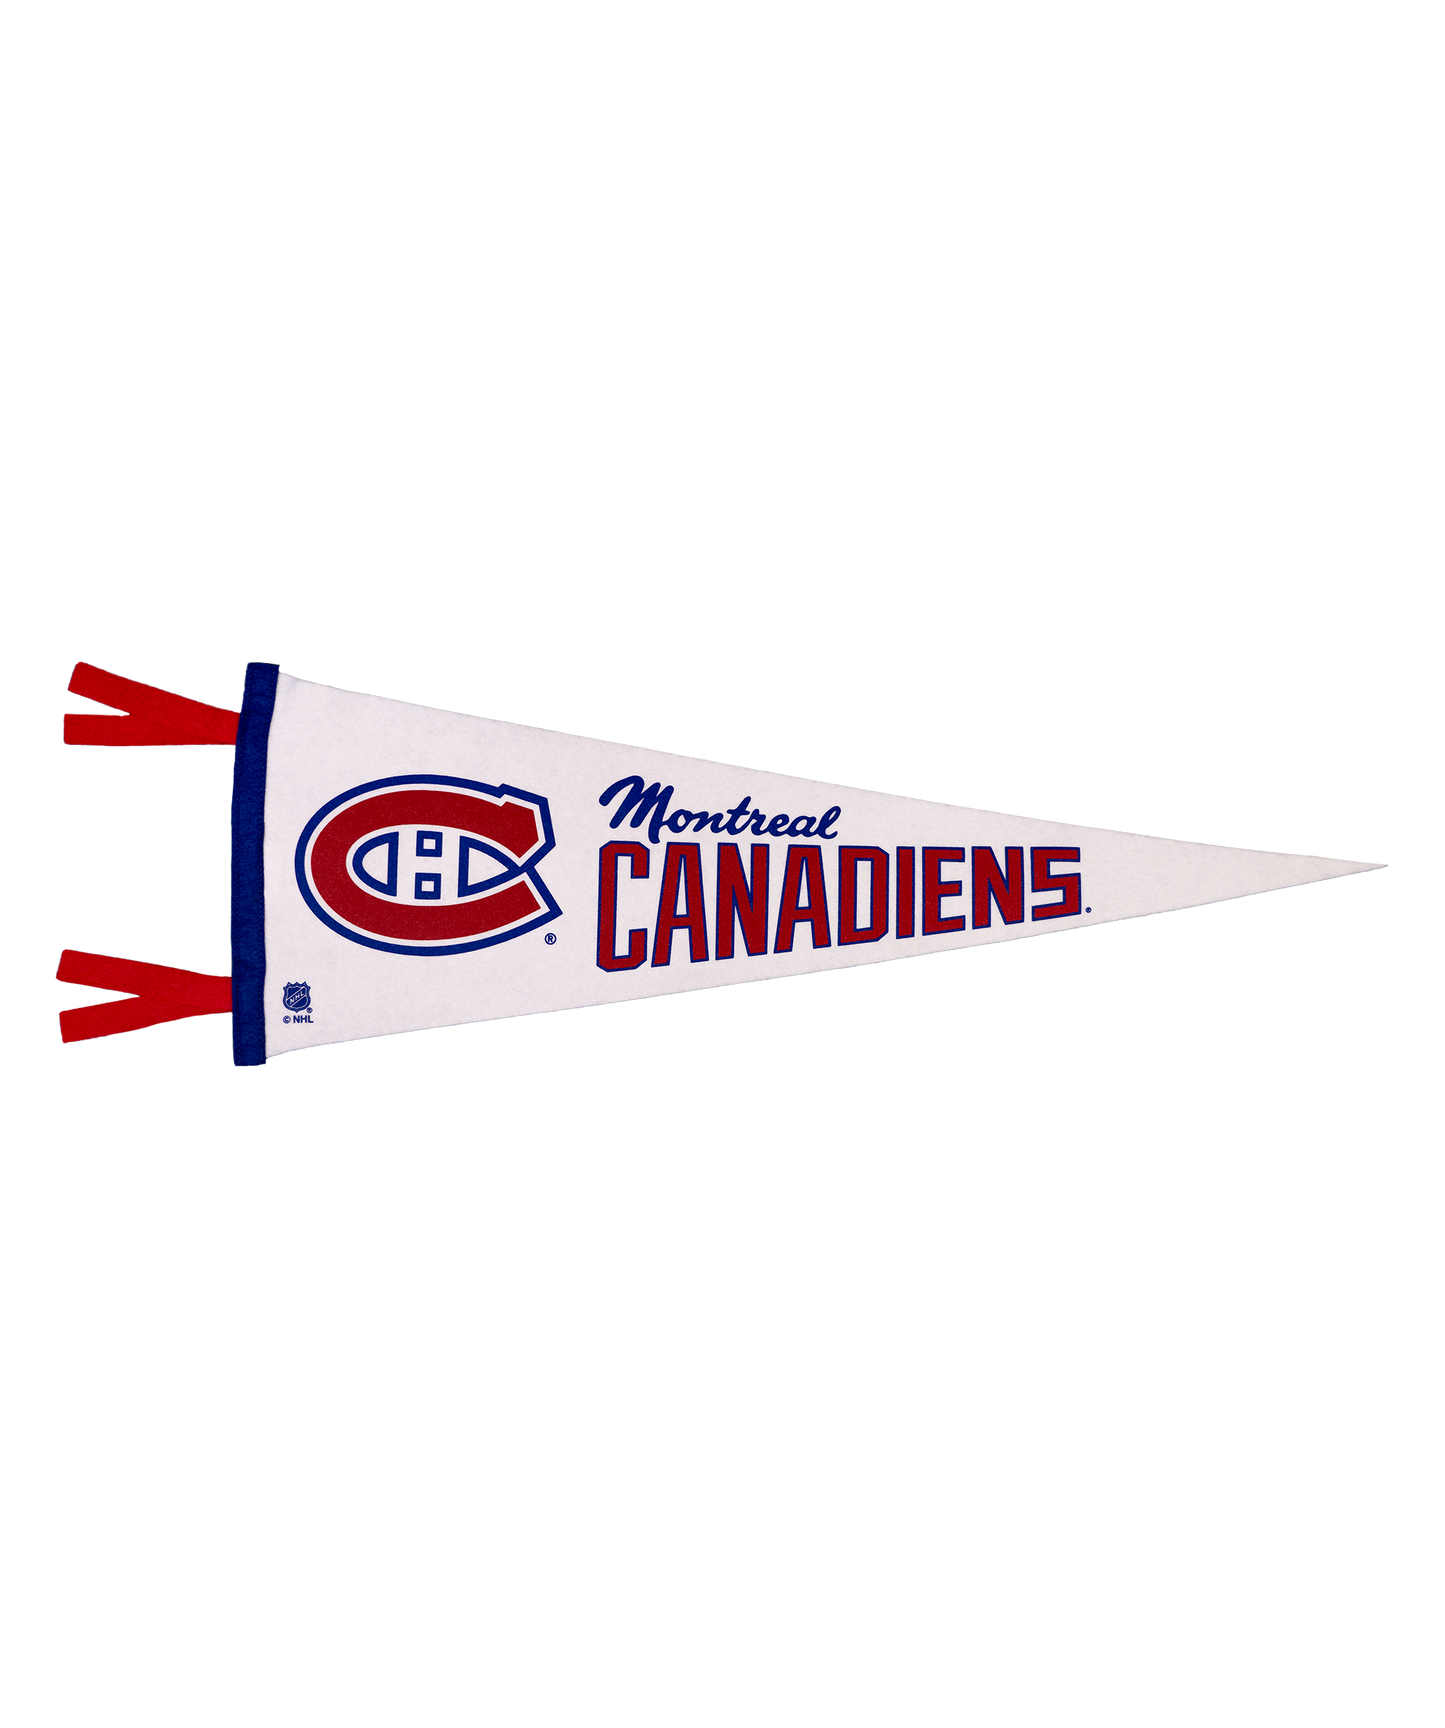 Montreal Canadiens Pennant | NHL x Oxford Pennant